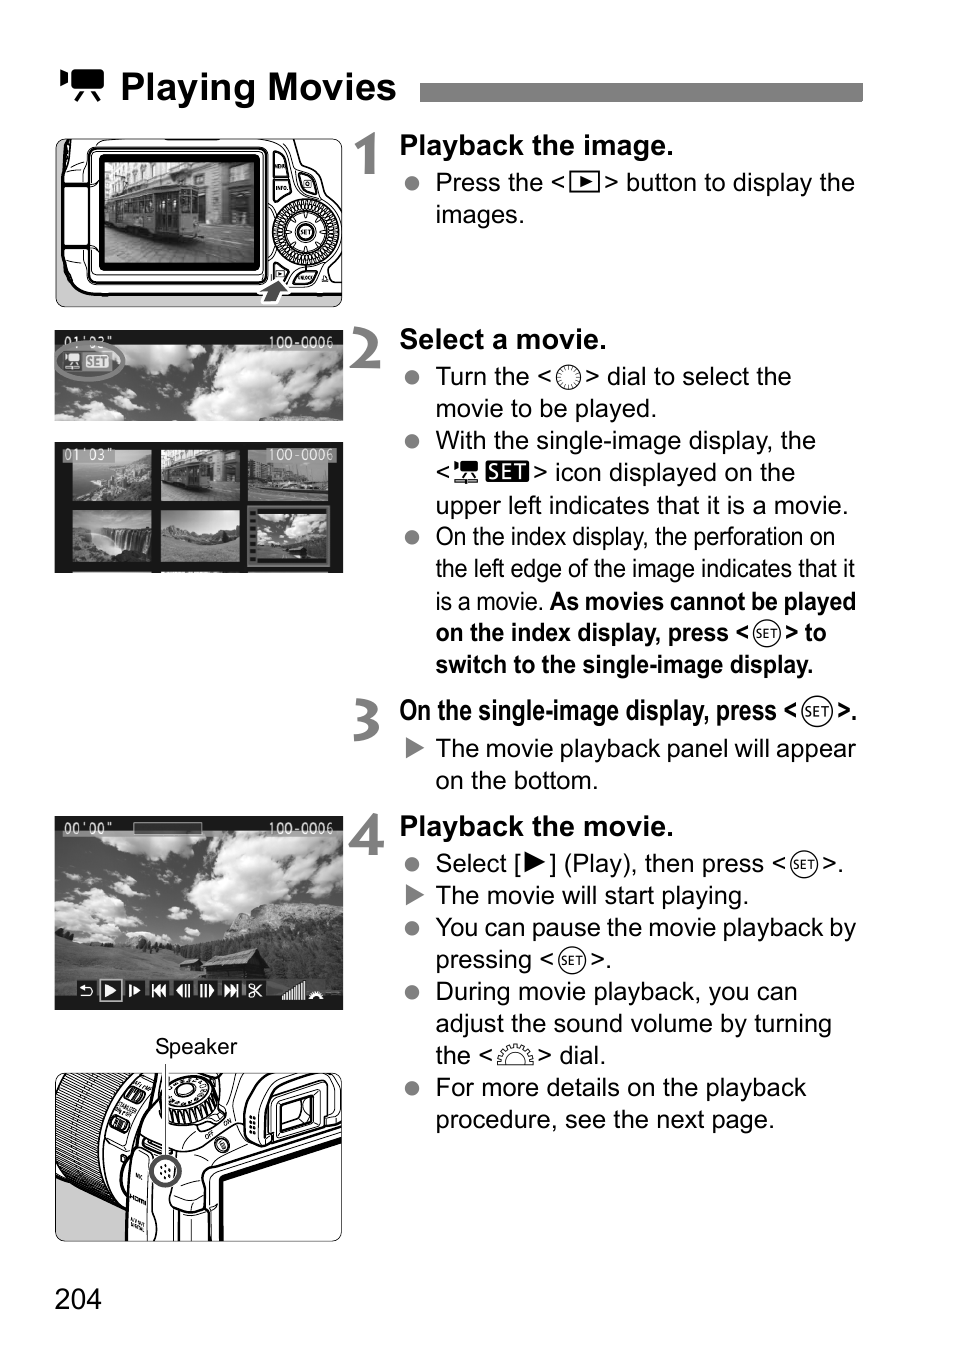 Playing movies, K playing movies | Canon EOS 60D User Manual | Page 204 / 320